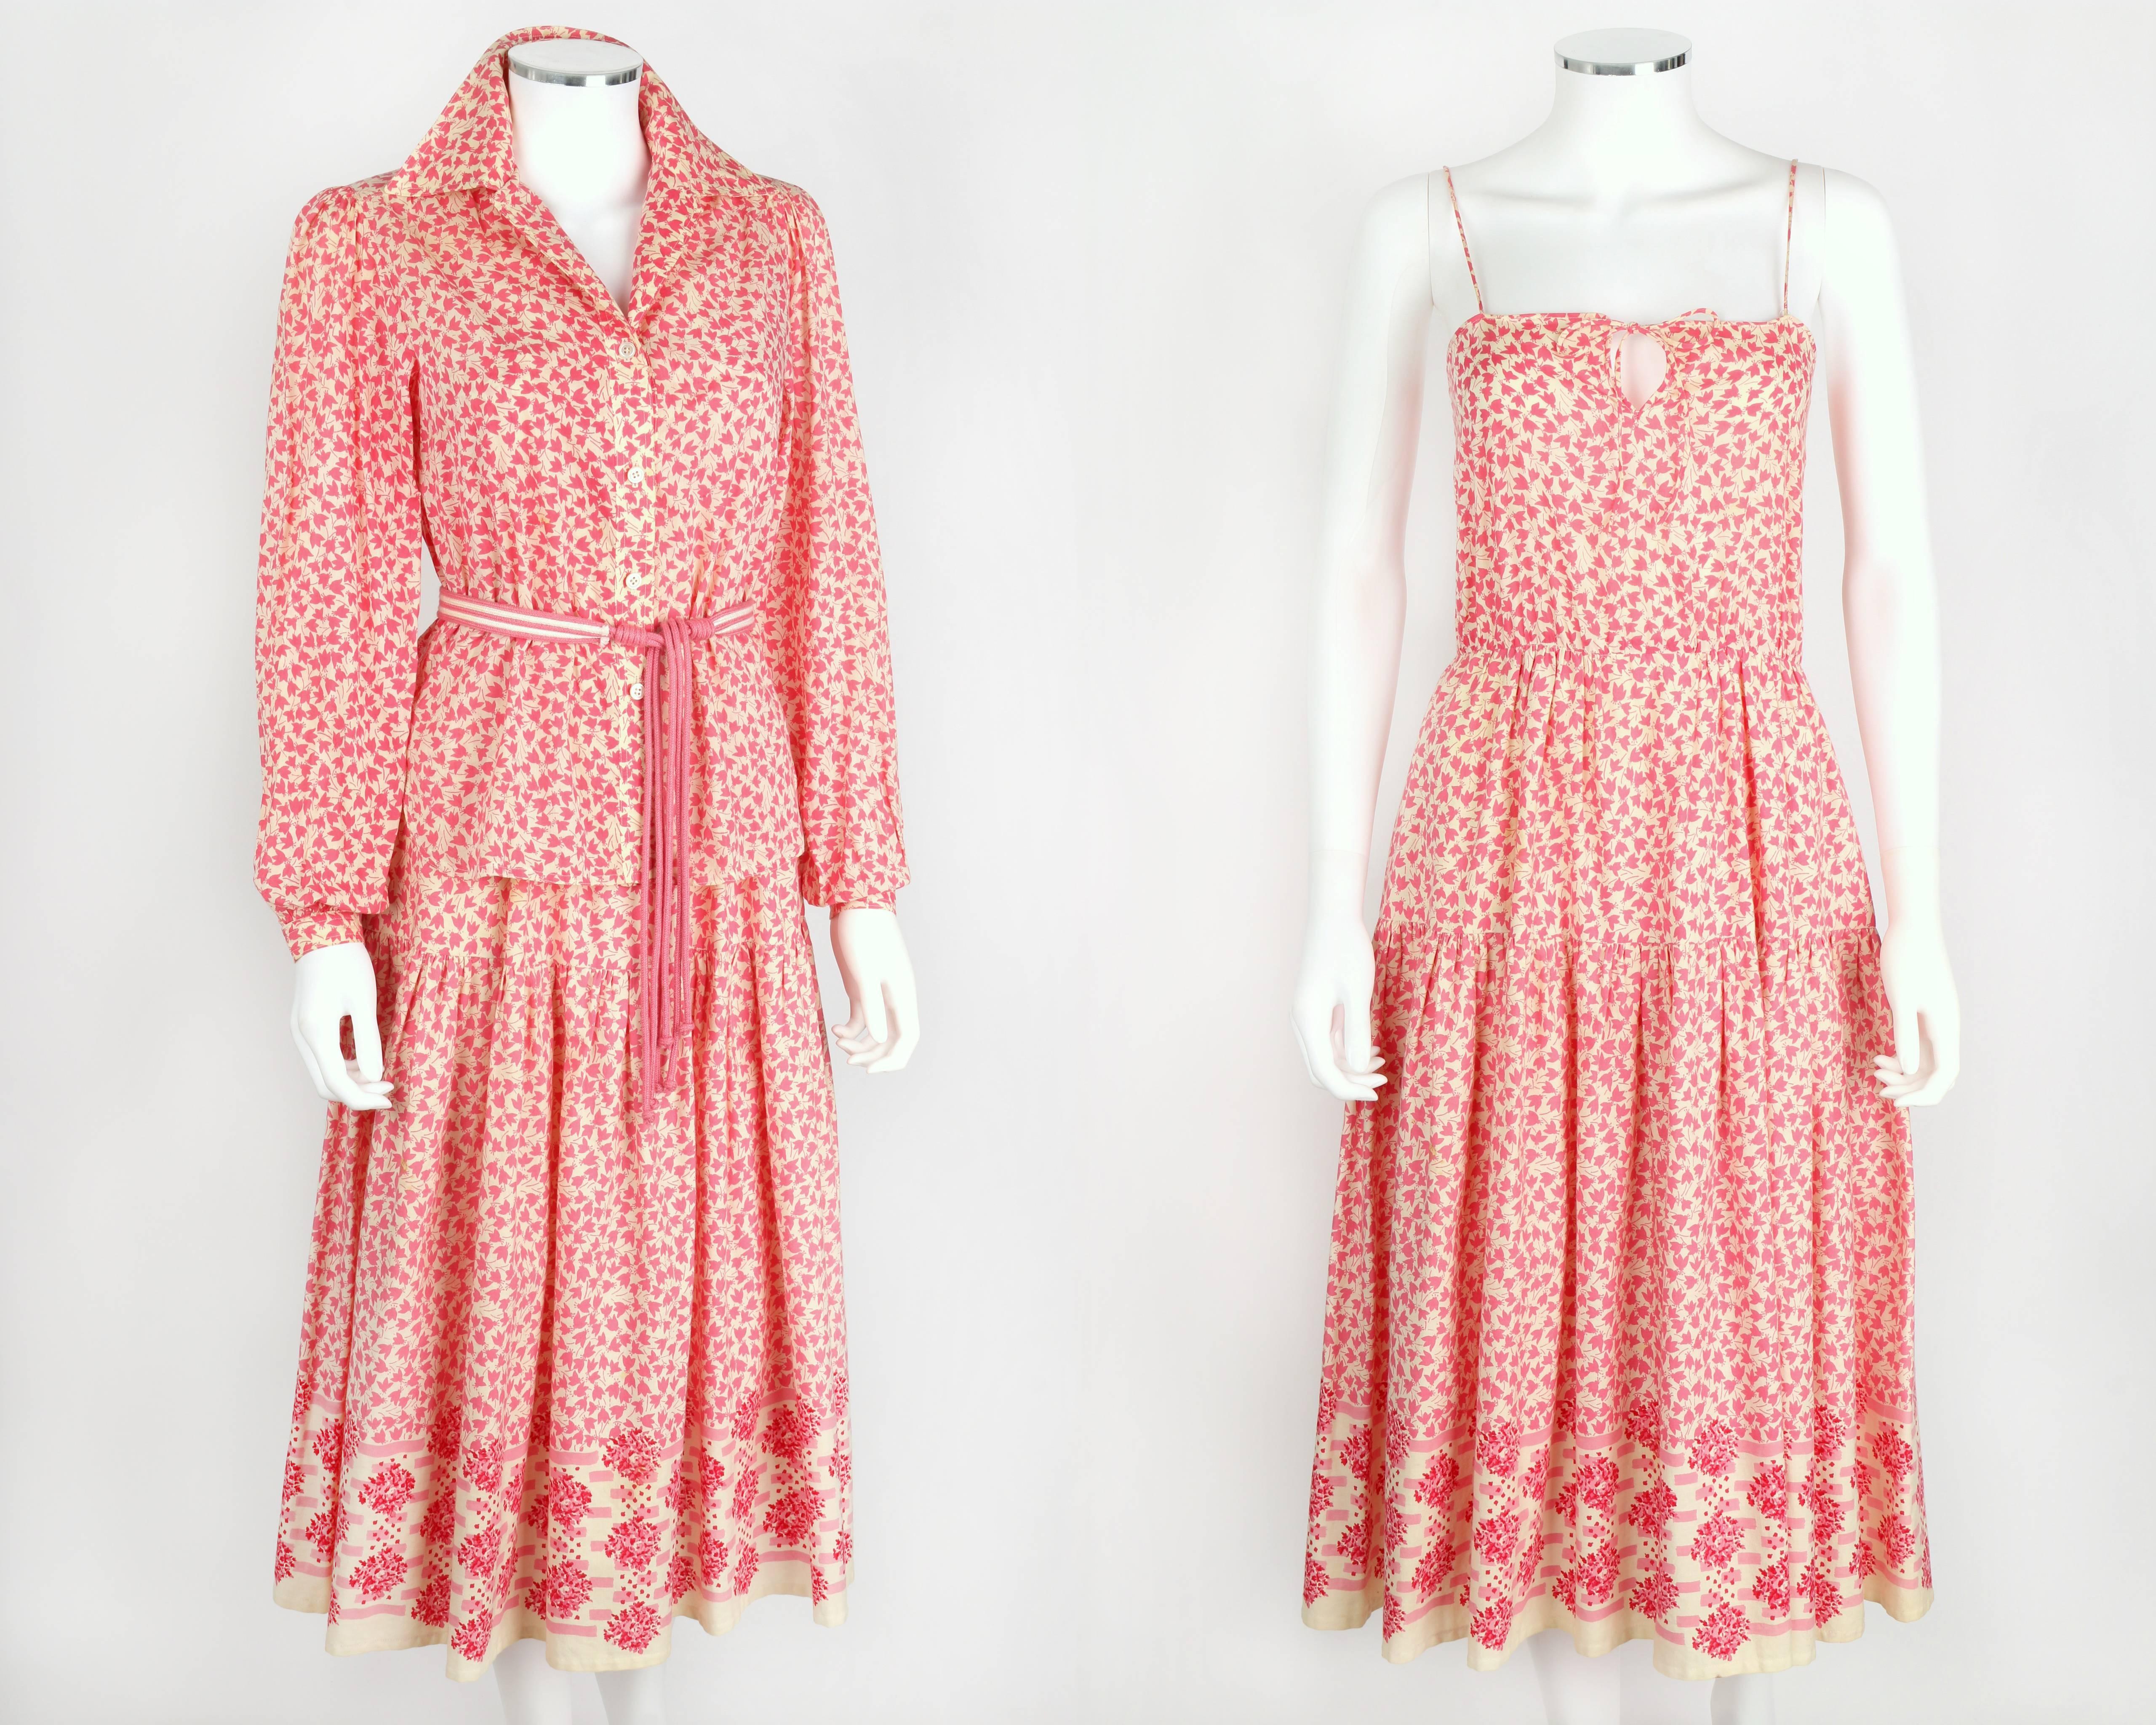 Vintage 1970s Oscar de la Renta ivory and pink floral print cotton ensemble. Spaghetti strap sundress has a tie keyhole detail at front. Buttons and zips at back. Long sleeve top buttons at front and cuffs. Yoke back. Matching scarf and rope belt.